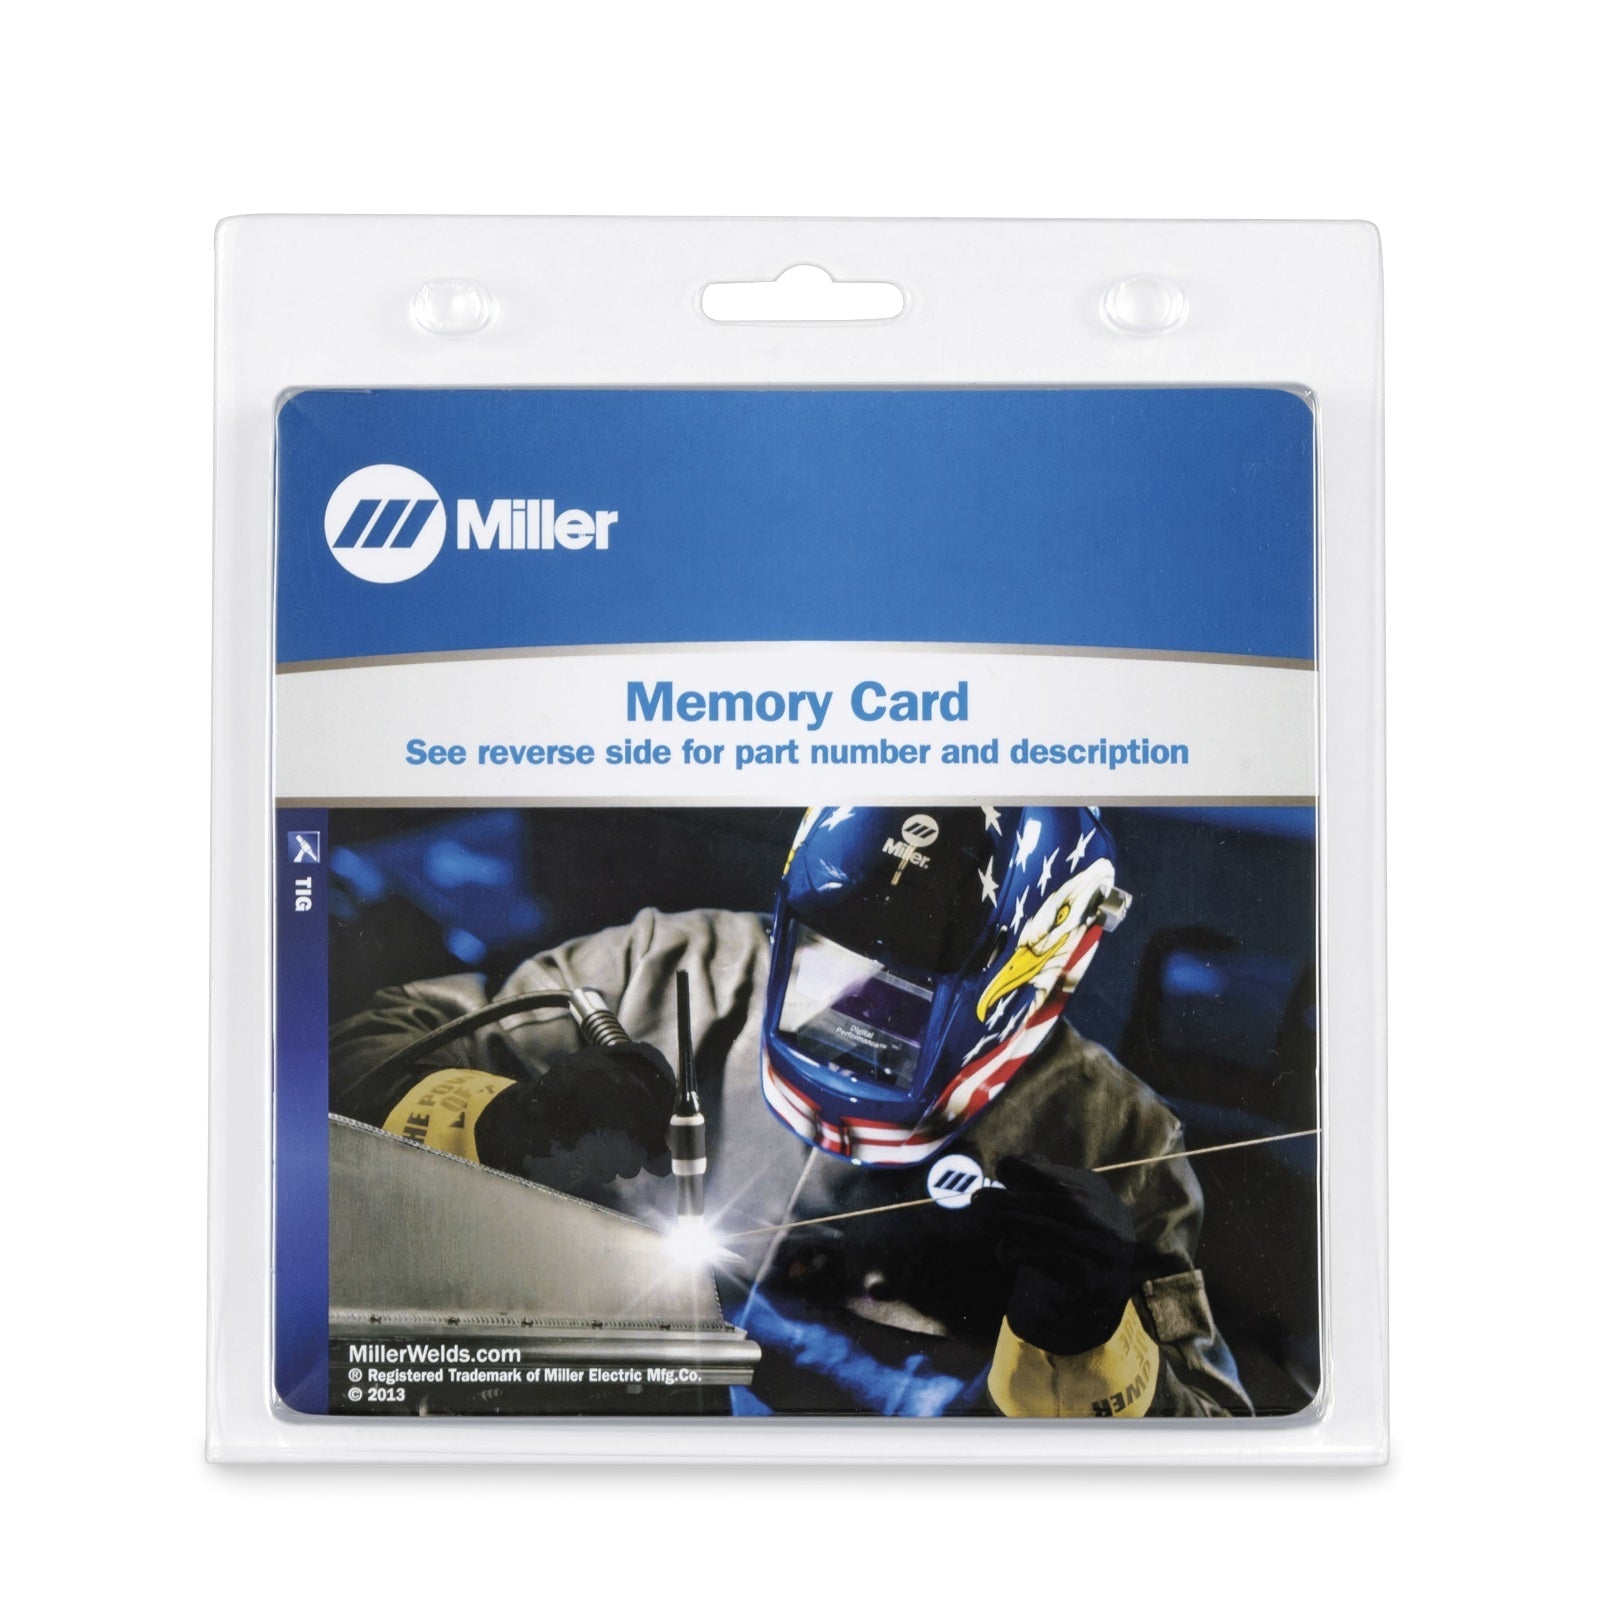 Miller Syncrowave 210 AC Frequency Memory Card (301127)